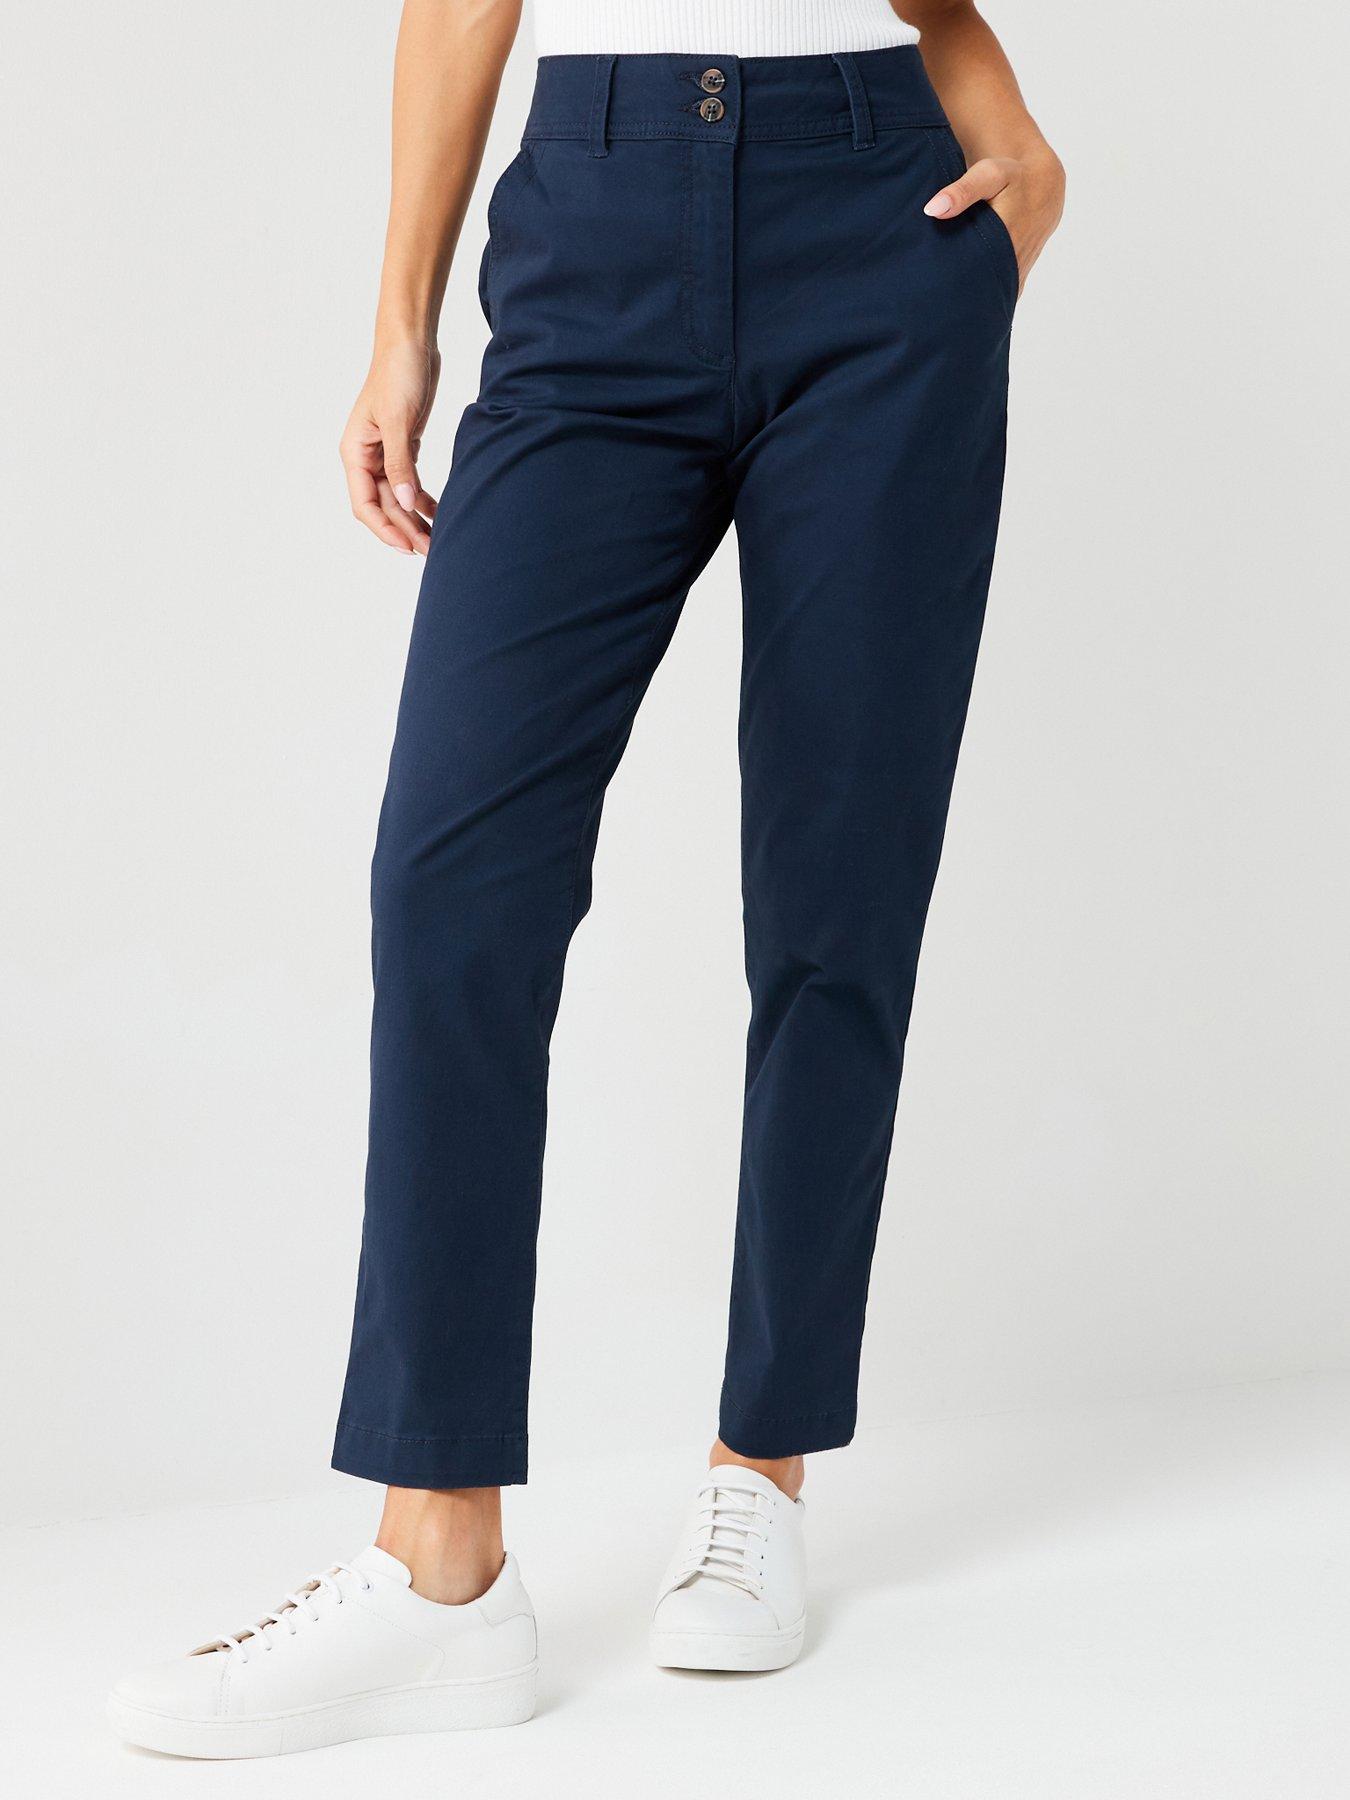 Pockets For Women - Yours Curve Navy Blue Double Pleat Stretch